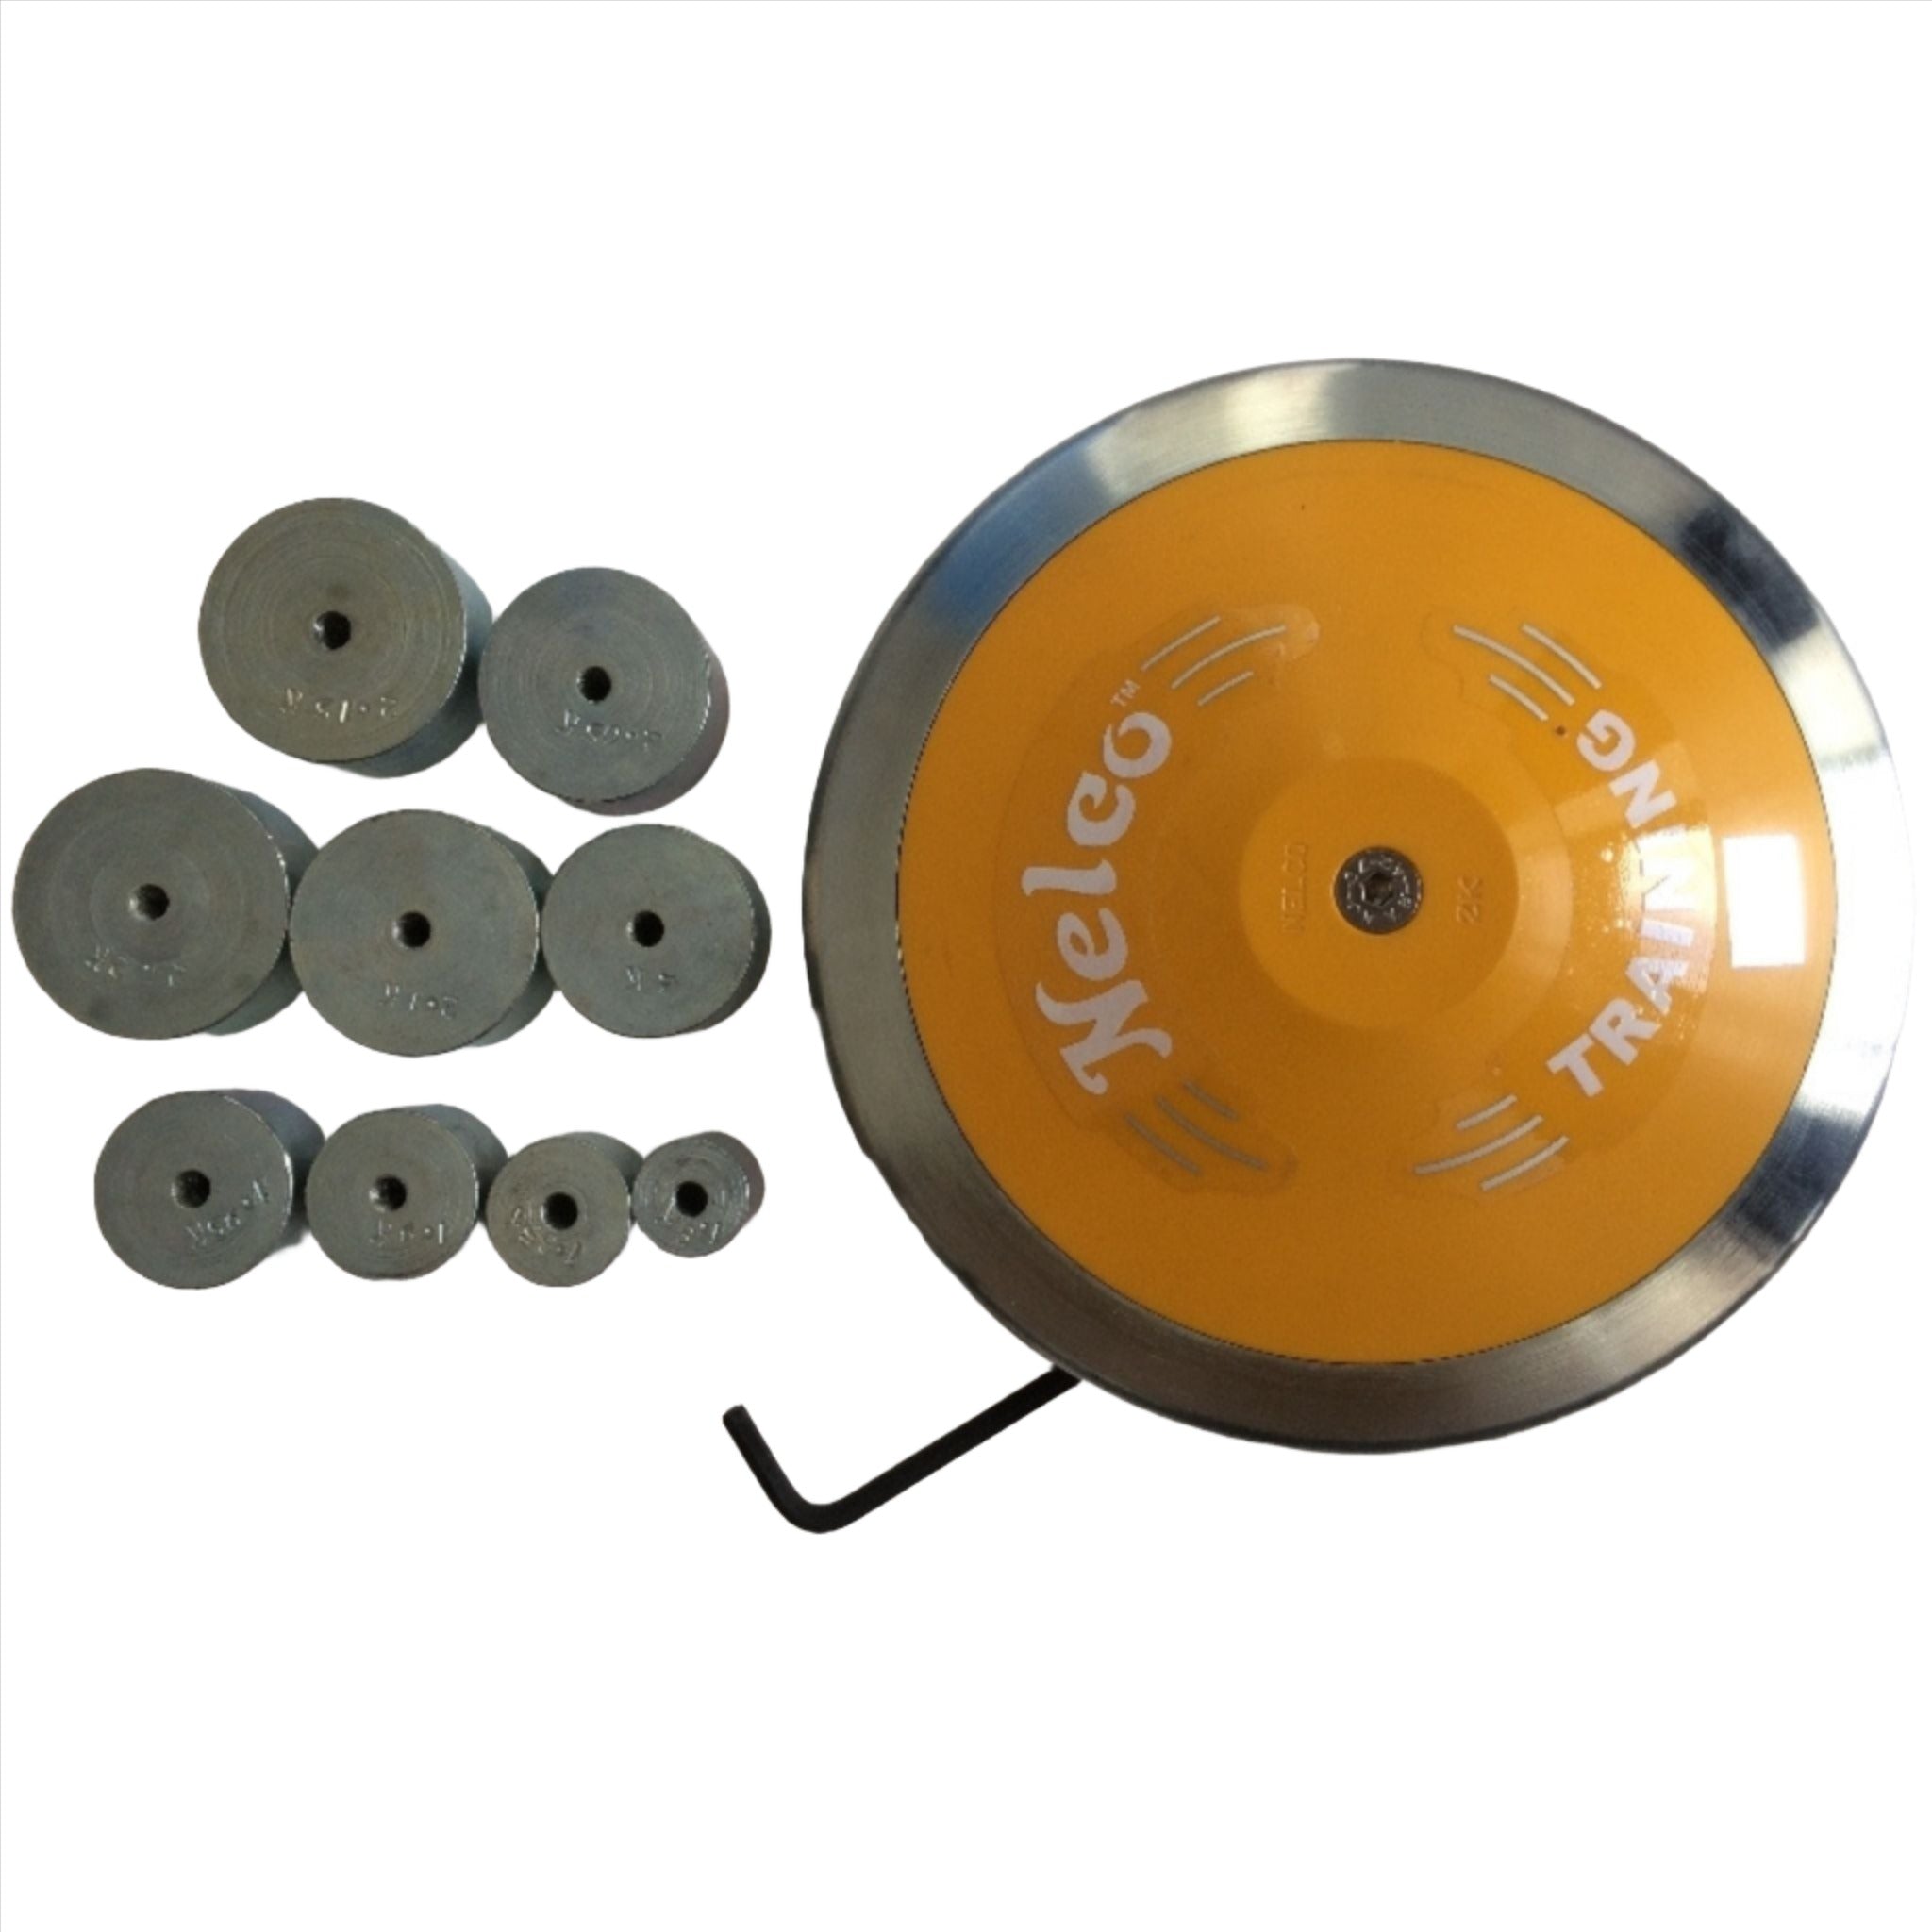 Adjustable Training Discus | Nelco | Yellow Plastic Sided discus with 9 weights of different sizes